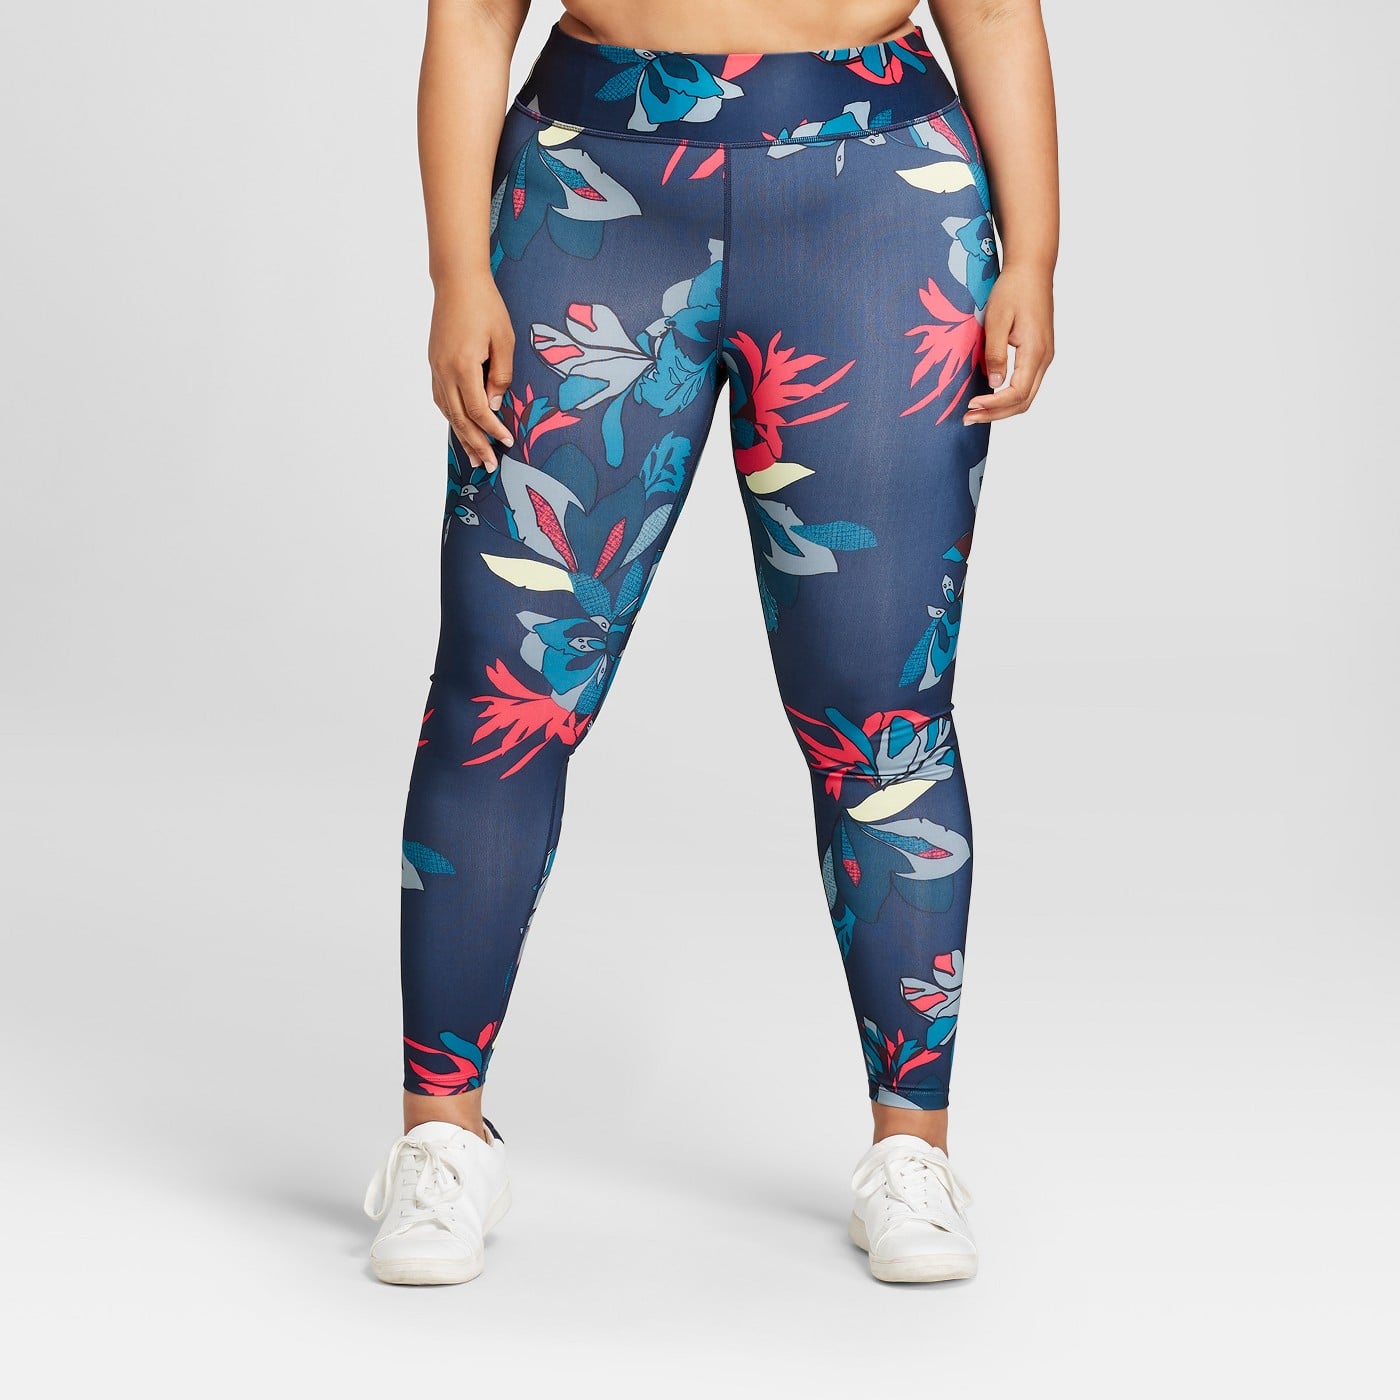 Colorful Plus Size Yoga Leggings For Women Full Length Loose Yoga Pants  Womens For Dance, TaiChi, And Modal Workouts Style X0831 From  Vip_official_001, $8.55